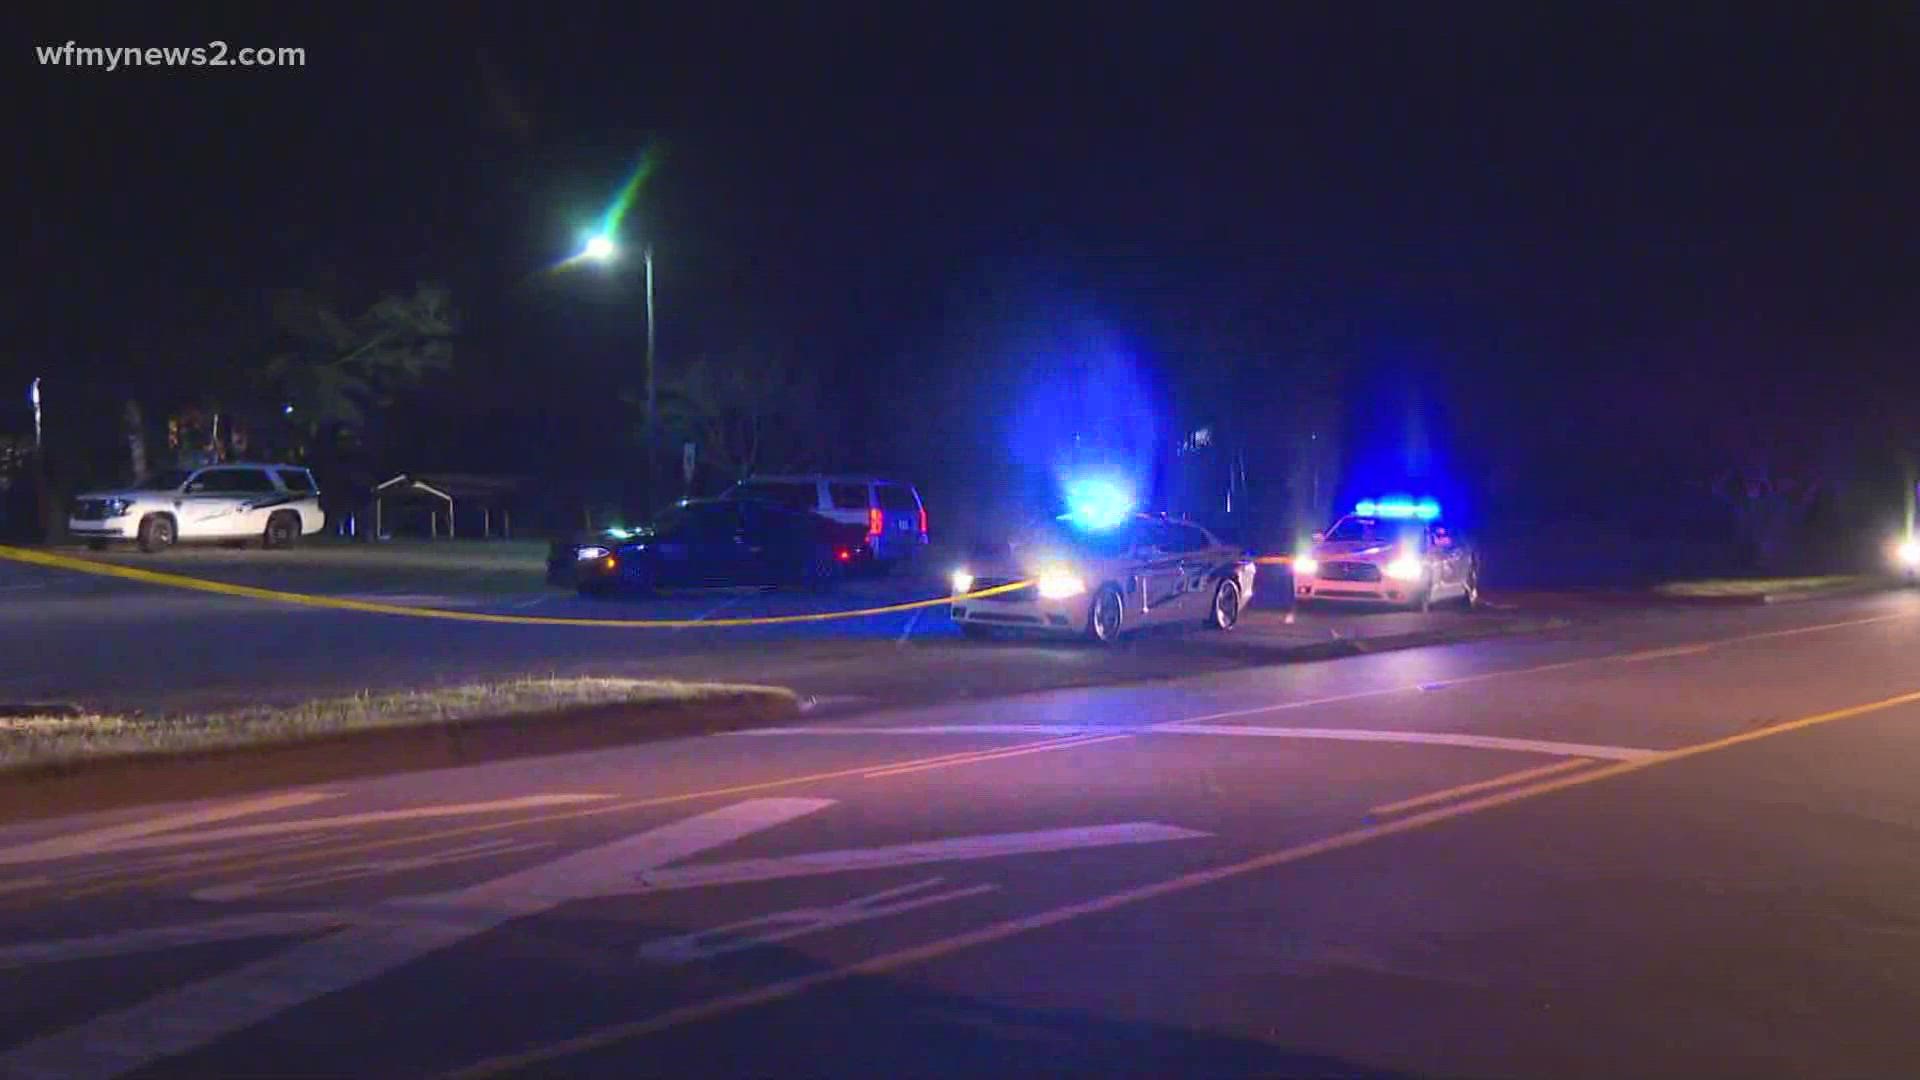 Officers were at the scene Wednesday night after a reported shooting.